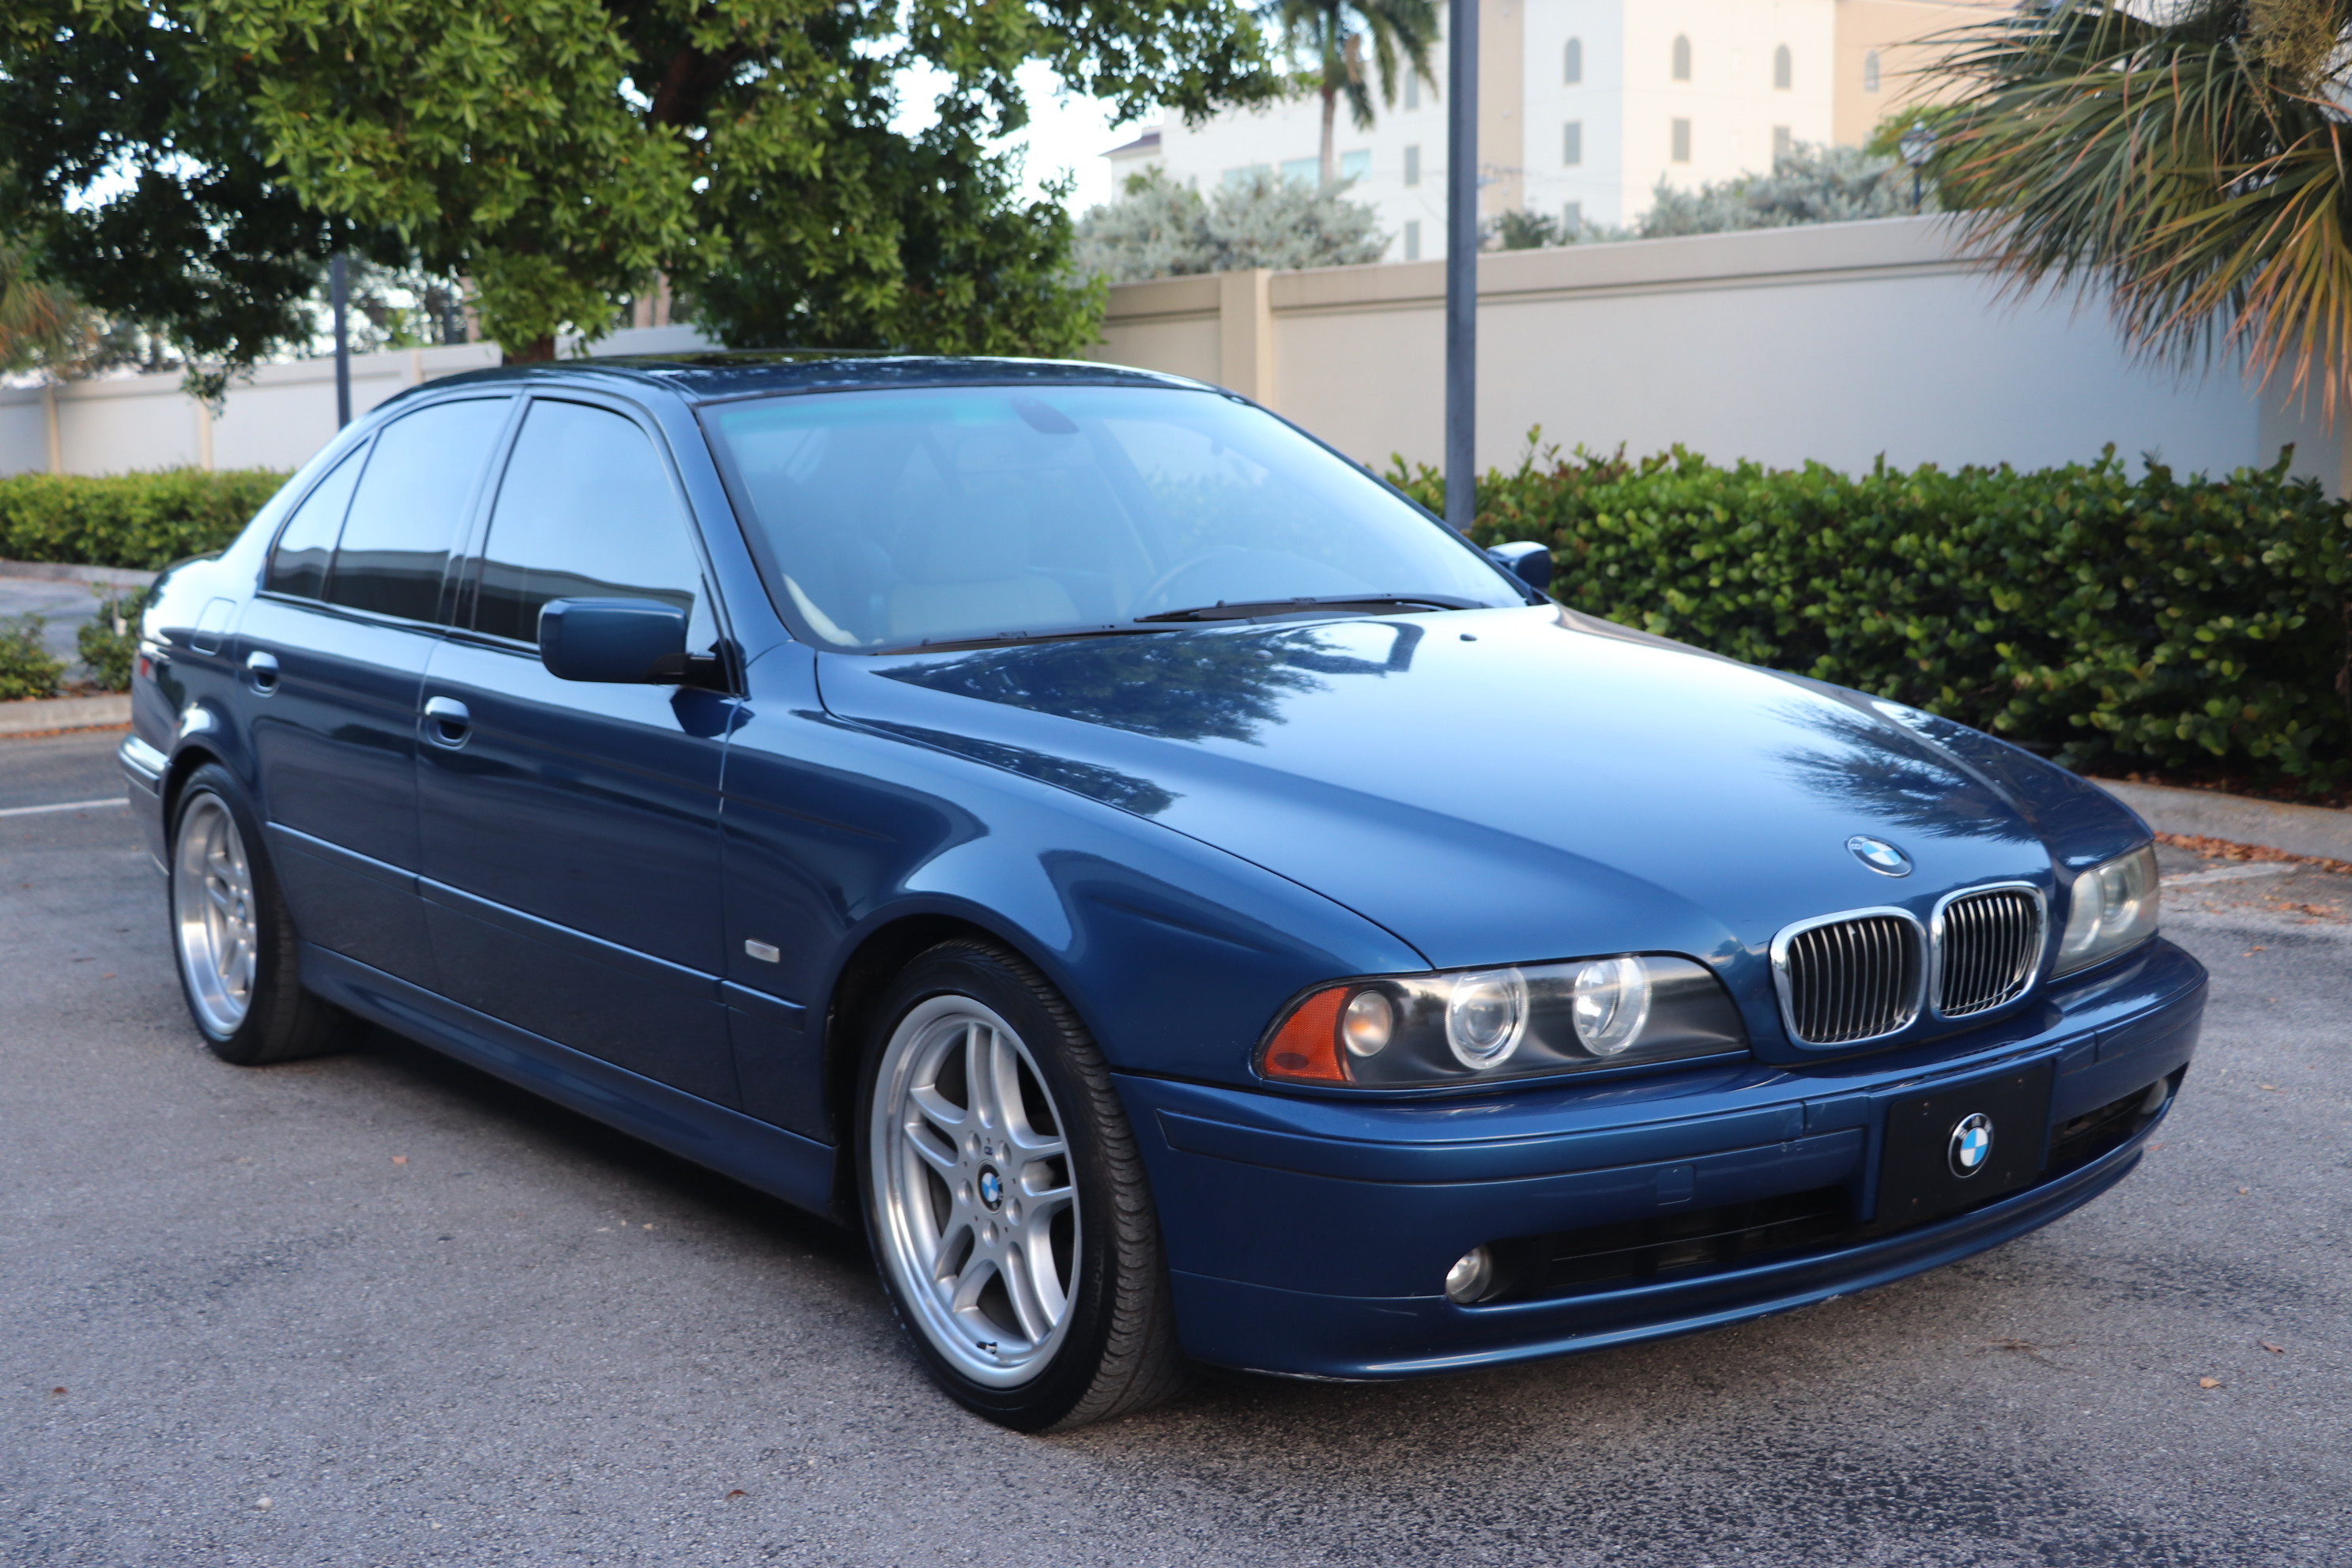 Buy Used 2001 BMW 540I SPORT 6SPEED MANUAL for $9 900 from trusted dealer  in Brooklyn, NY!